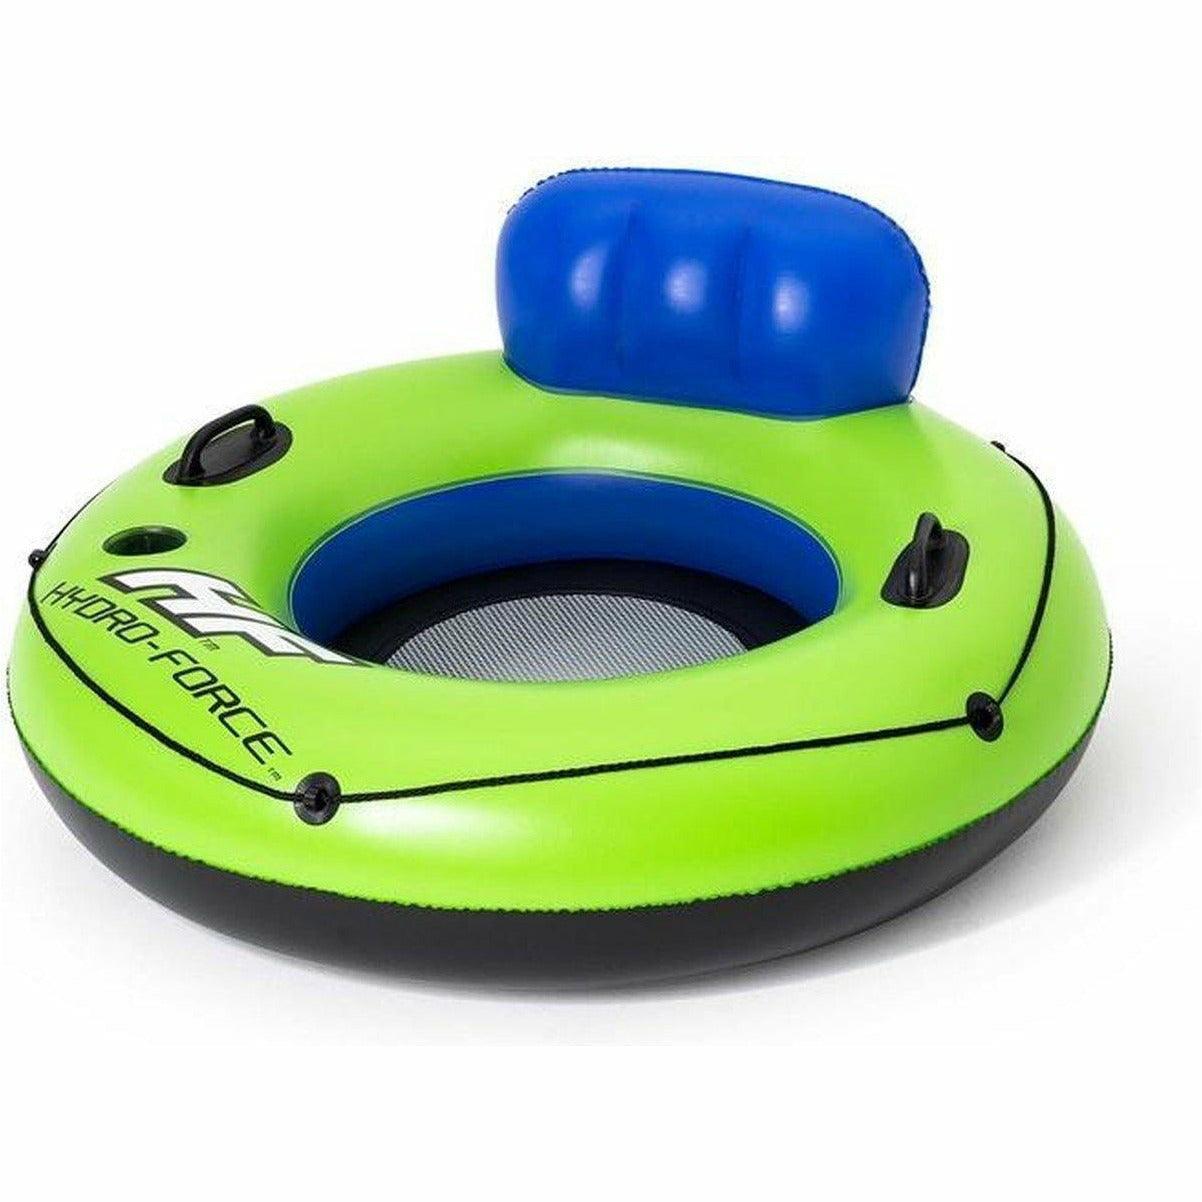 Bestway 43108 Inflatable Swim Ring 106 cm - Green - BumbleToys - 8-13 Years, Boys, Eagle Plus, Floaters, Sand Toys Pools & Inflatables